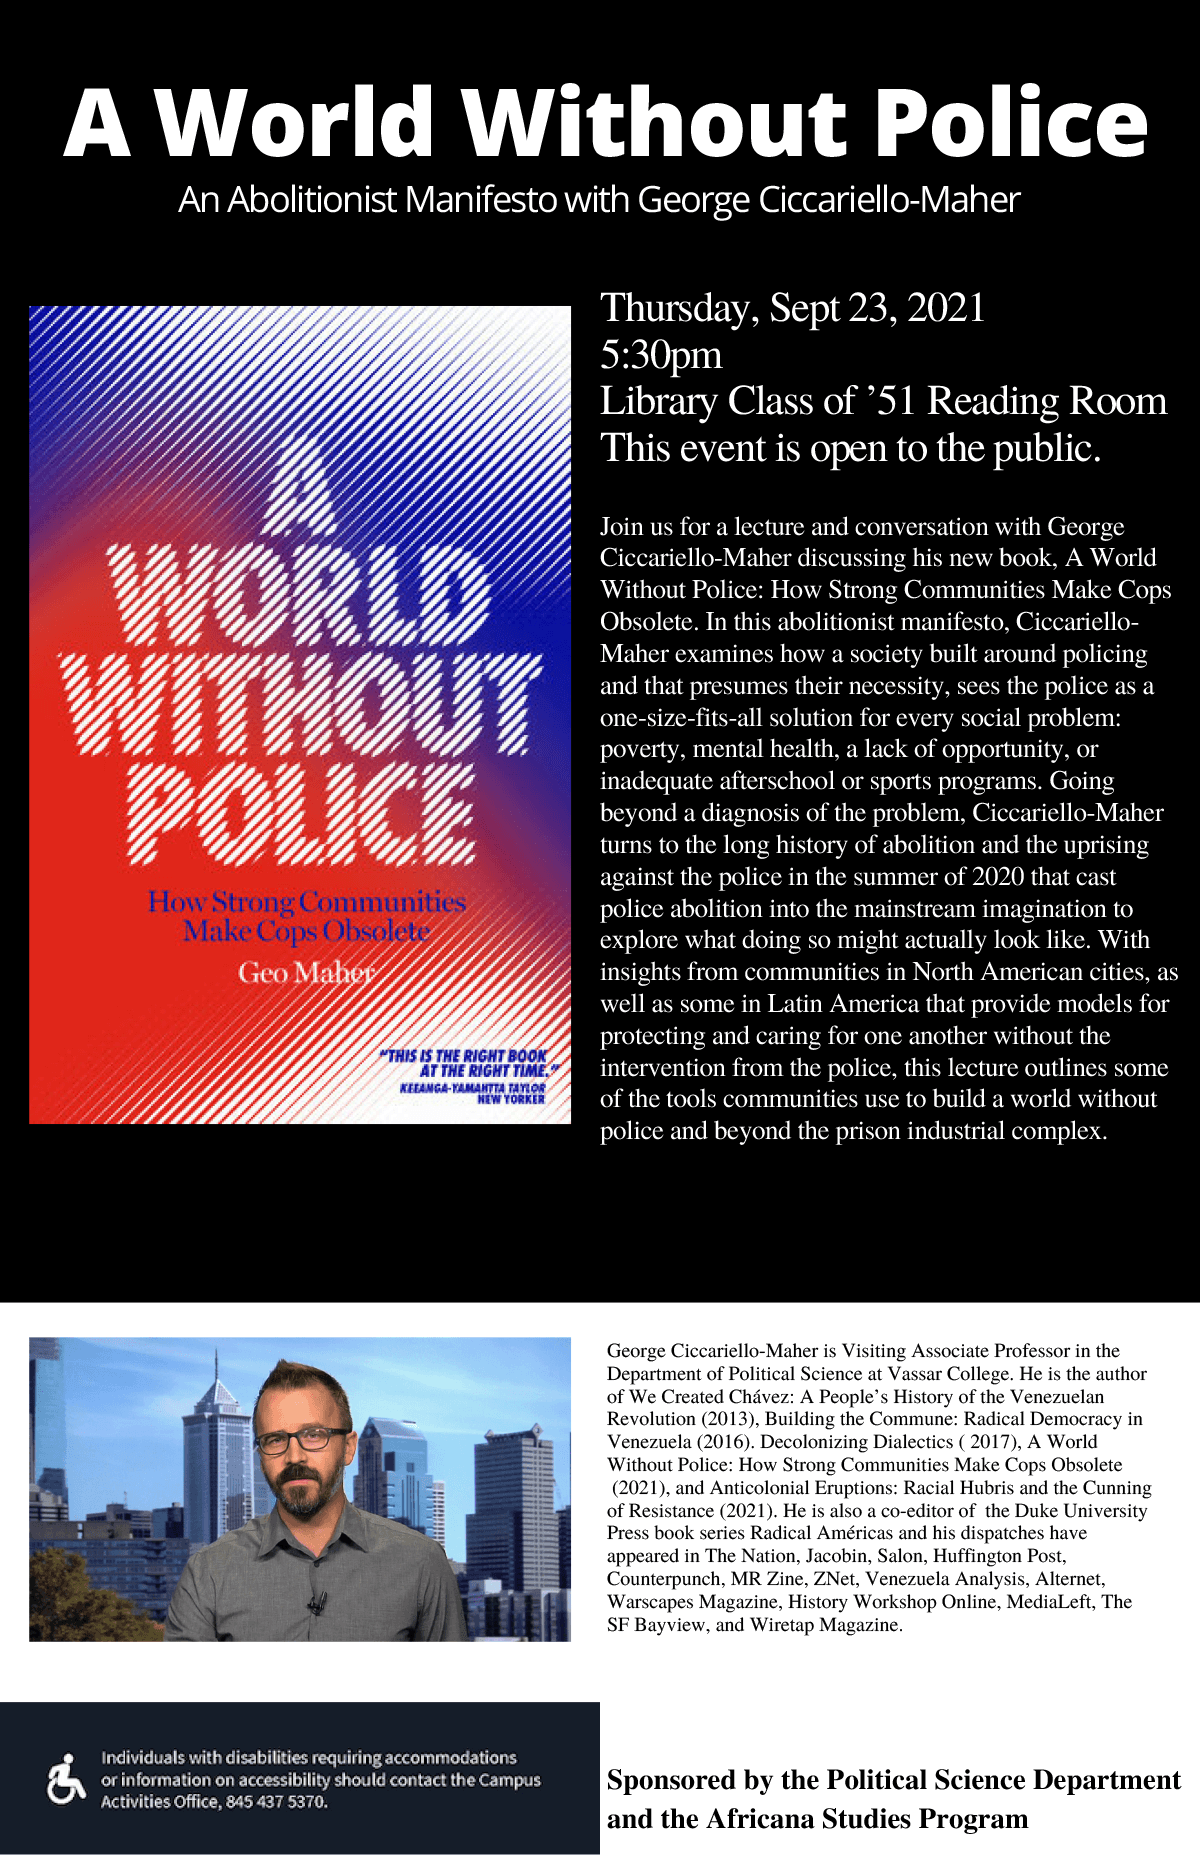 A World Without Police. Thursday September 23, 2021, 5:30 p.m., Library Class of ’51 Reading Room.